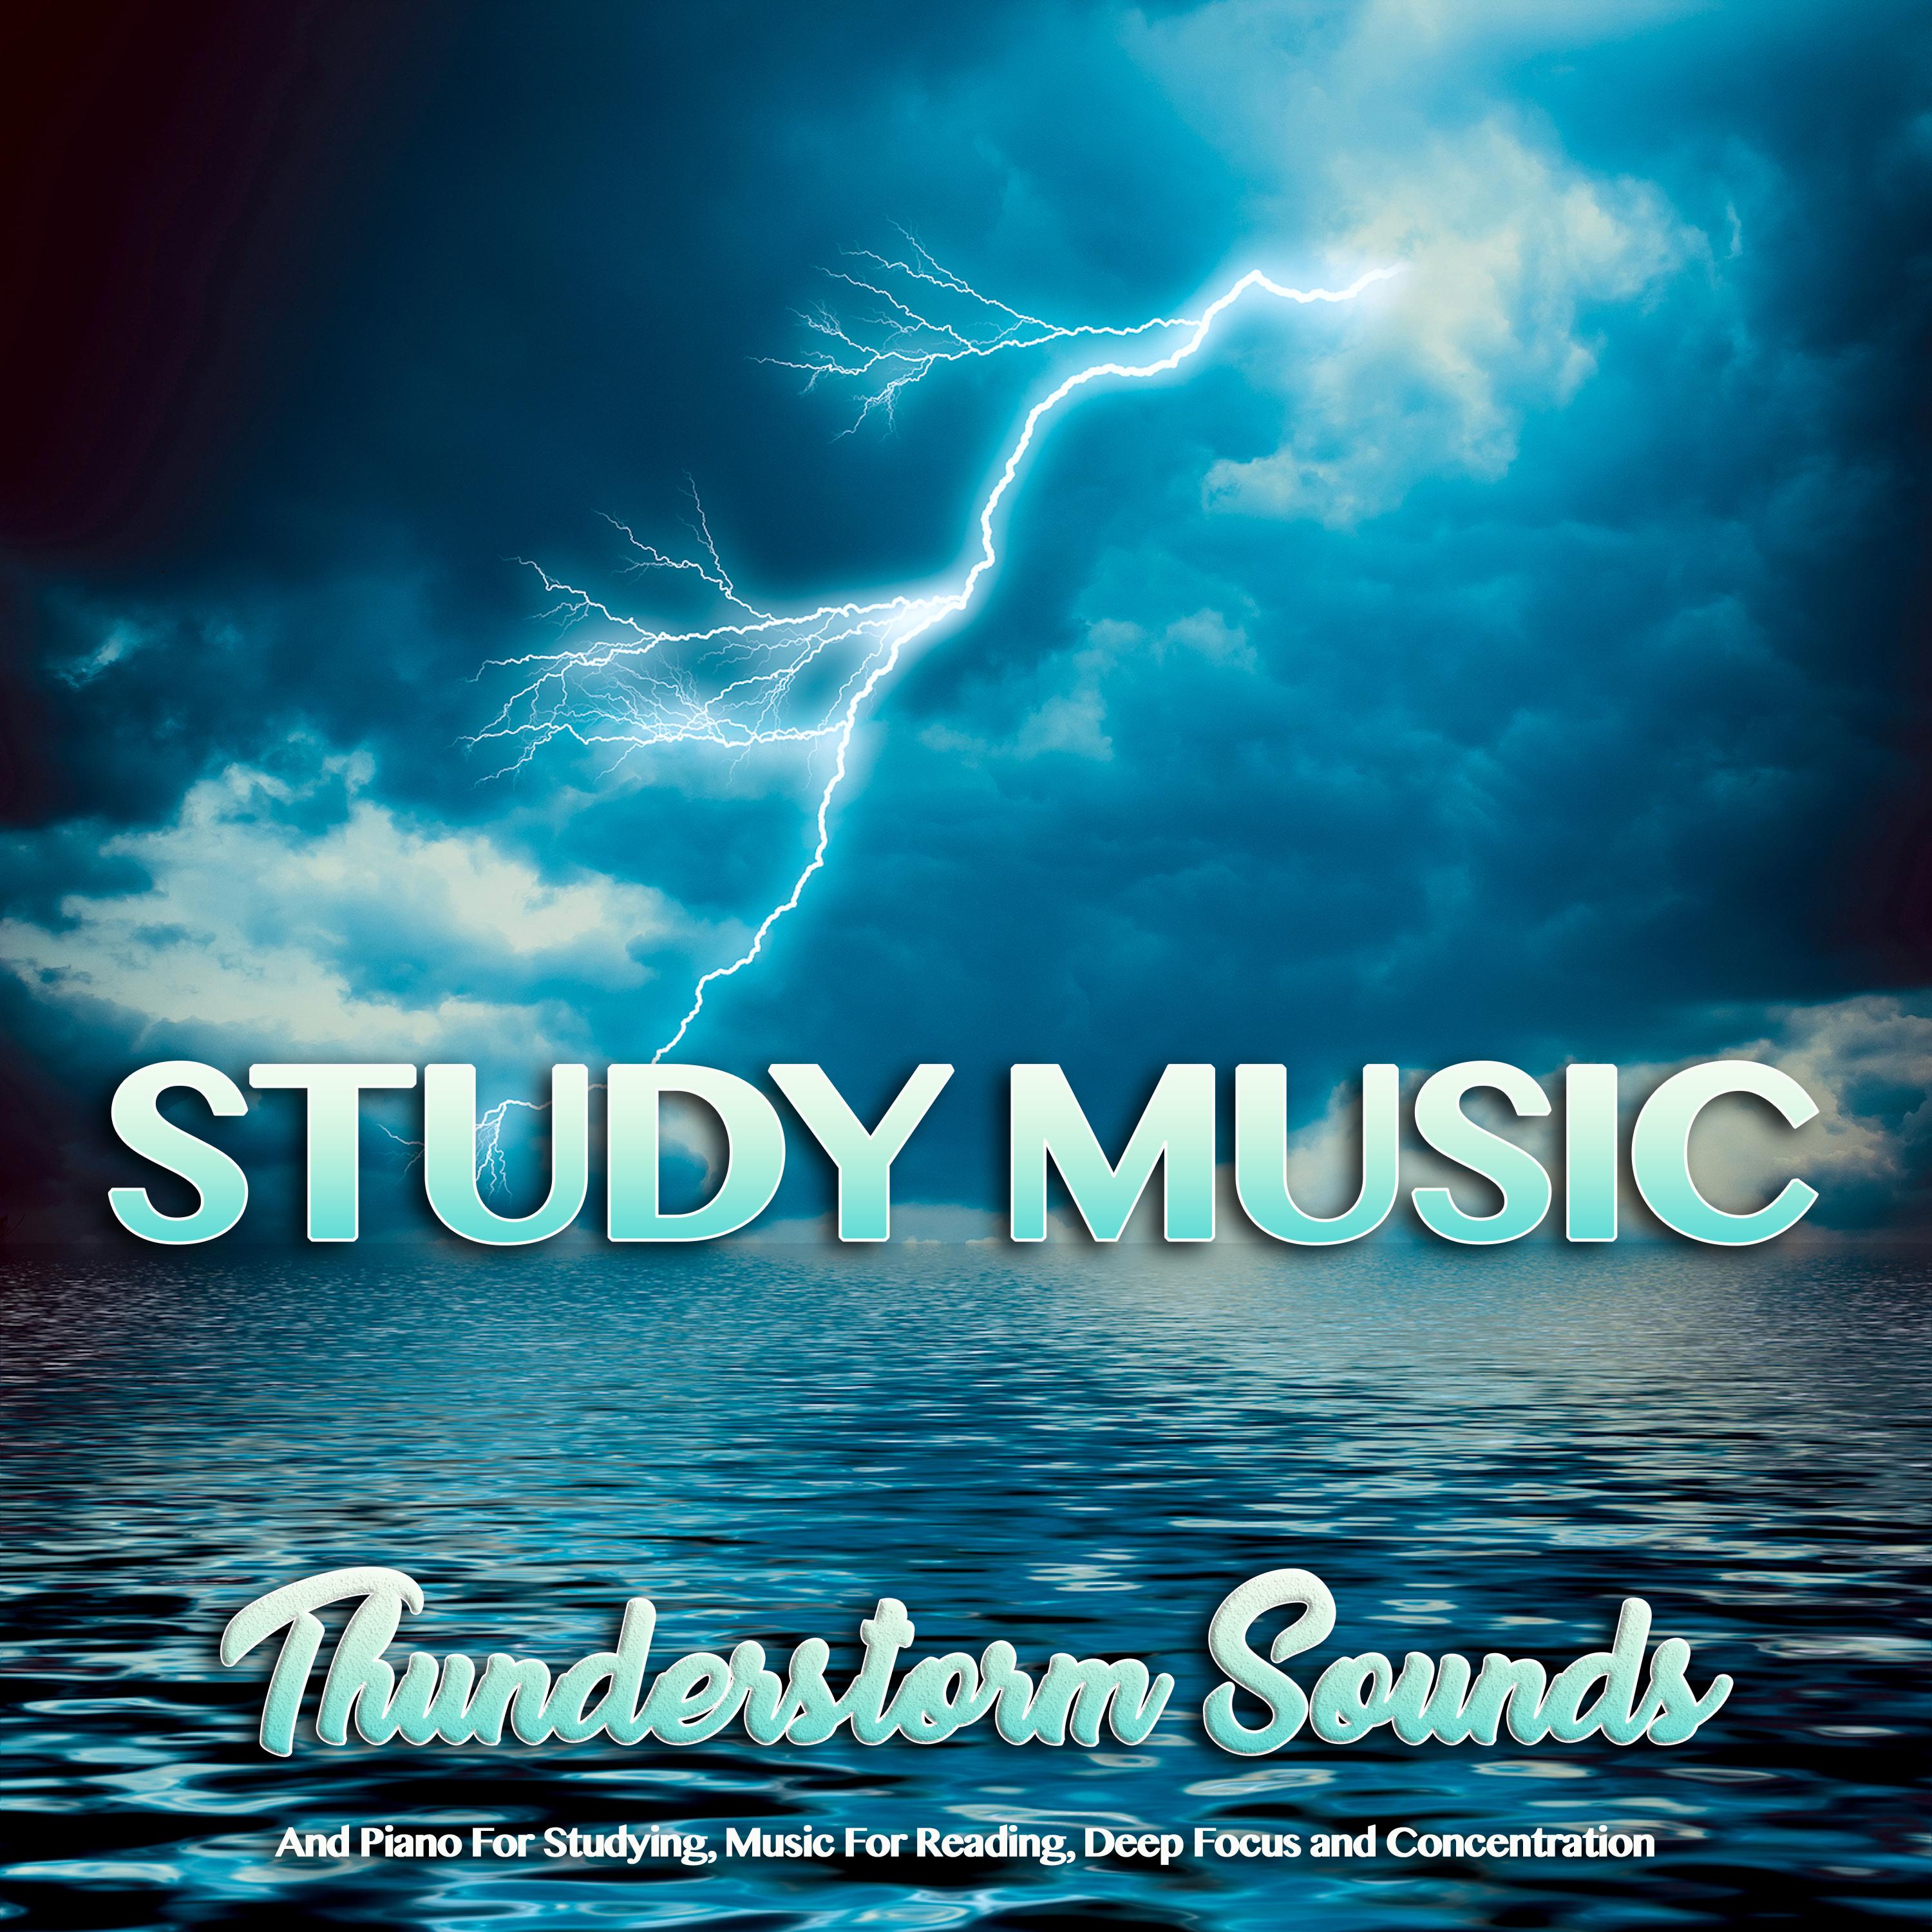 Music For Studying and Thunderstorm Sounds